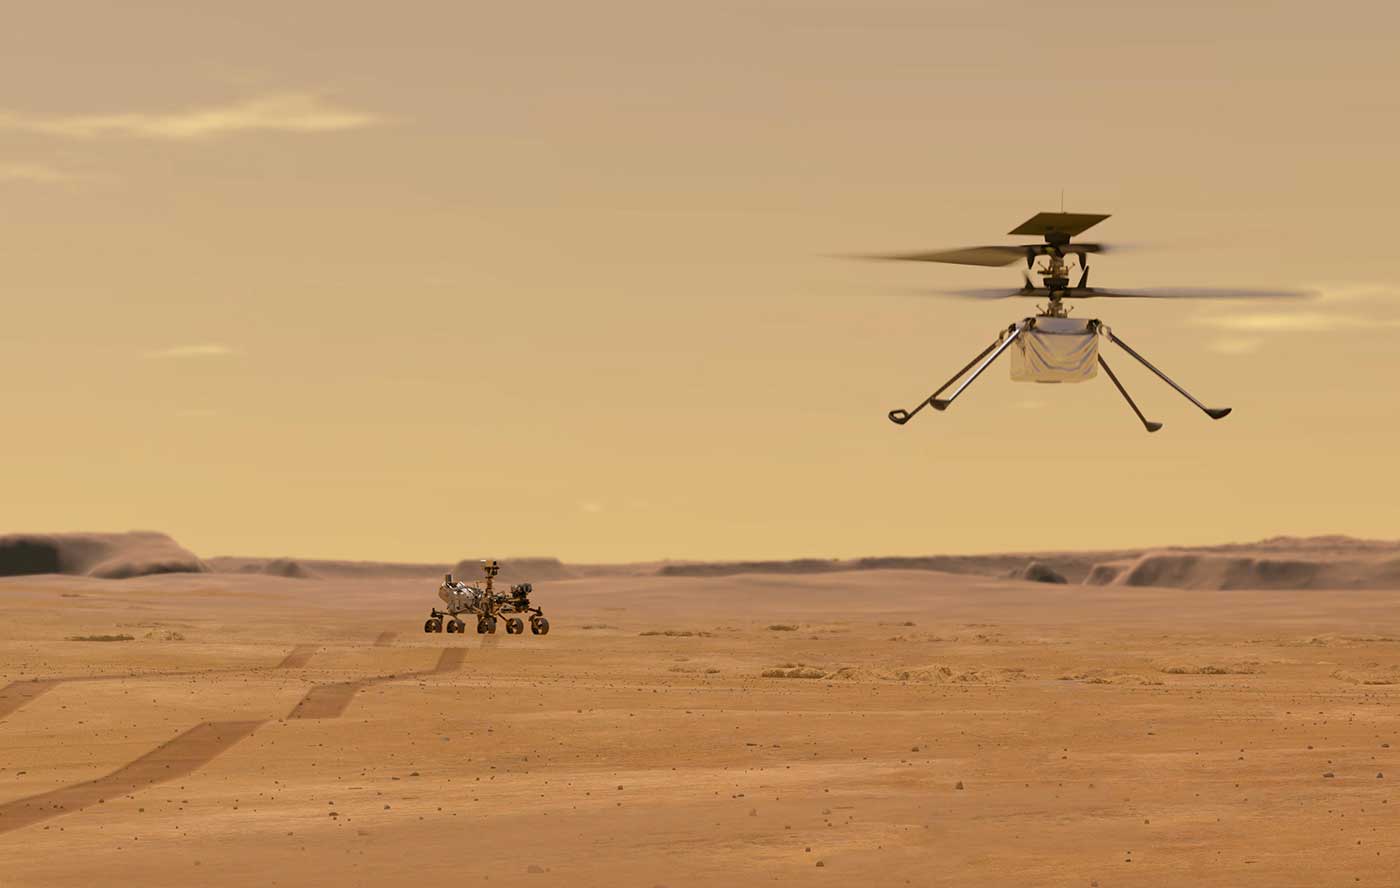 Perseverance rover and the Ingenuity helicopter.